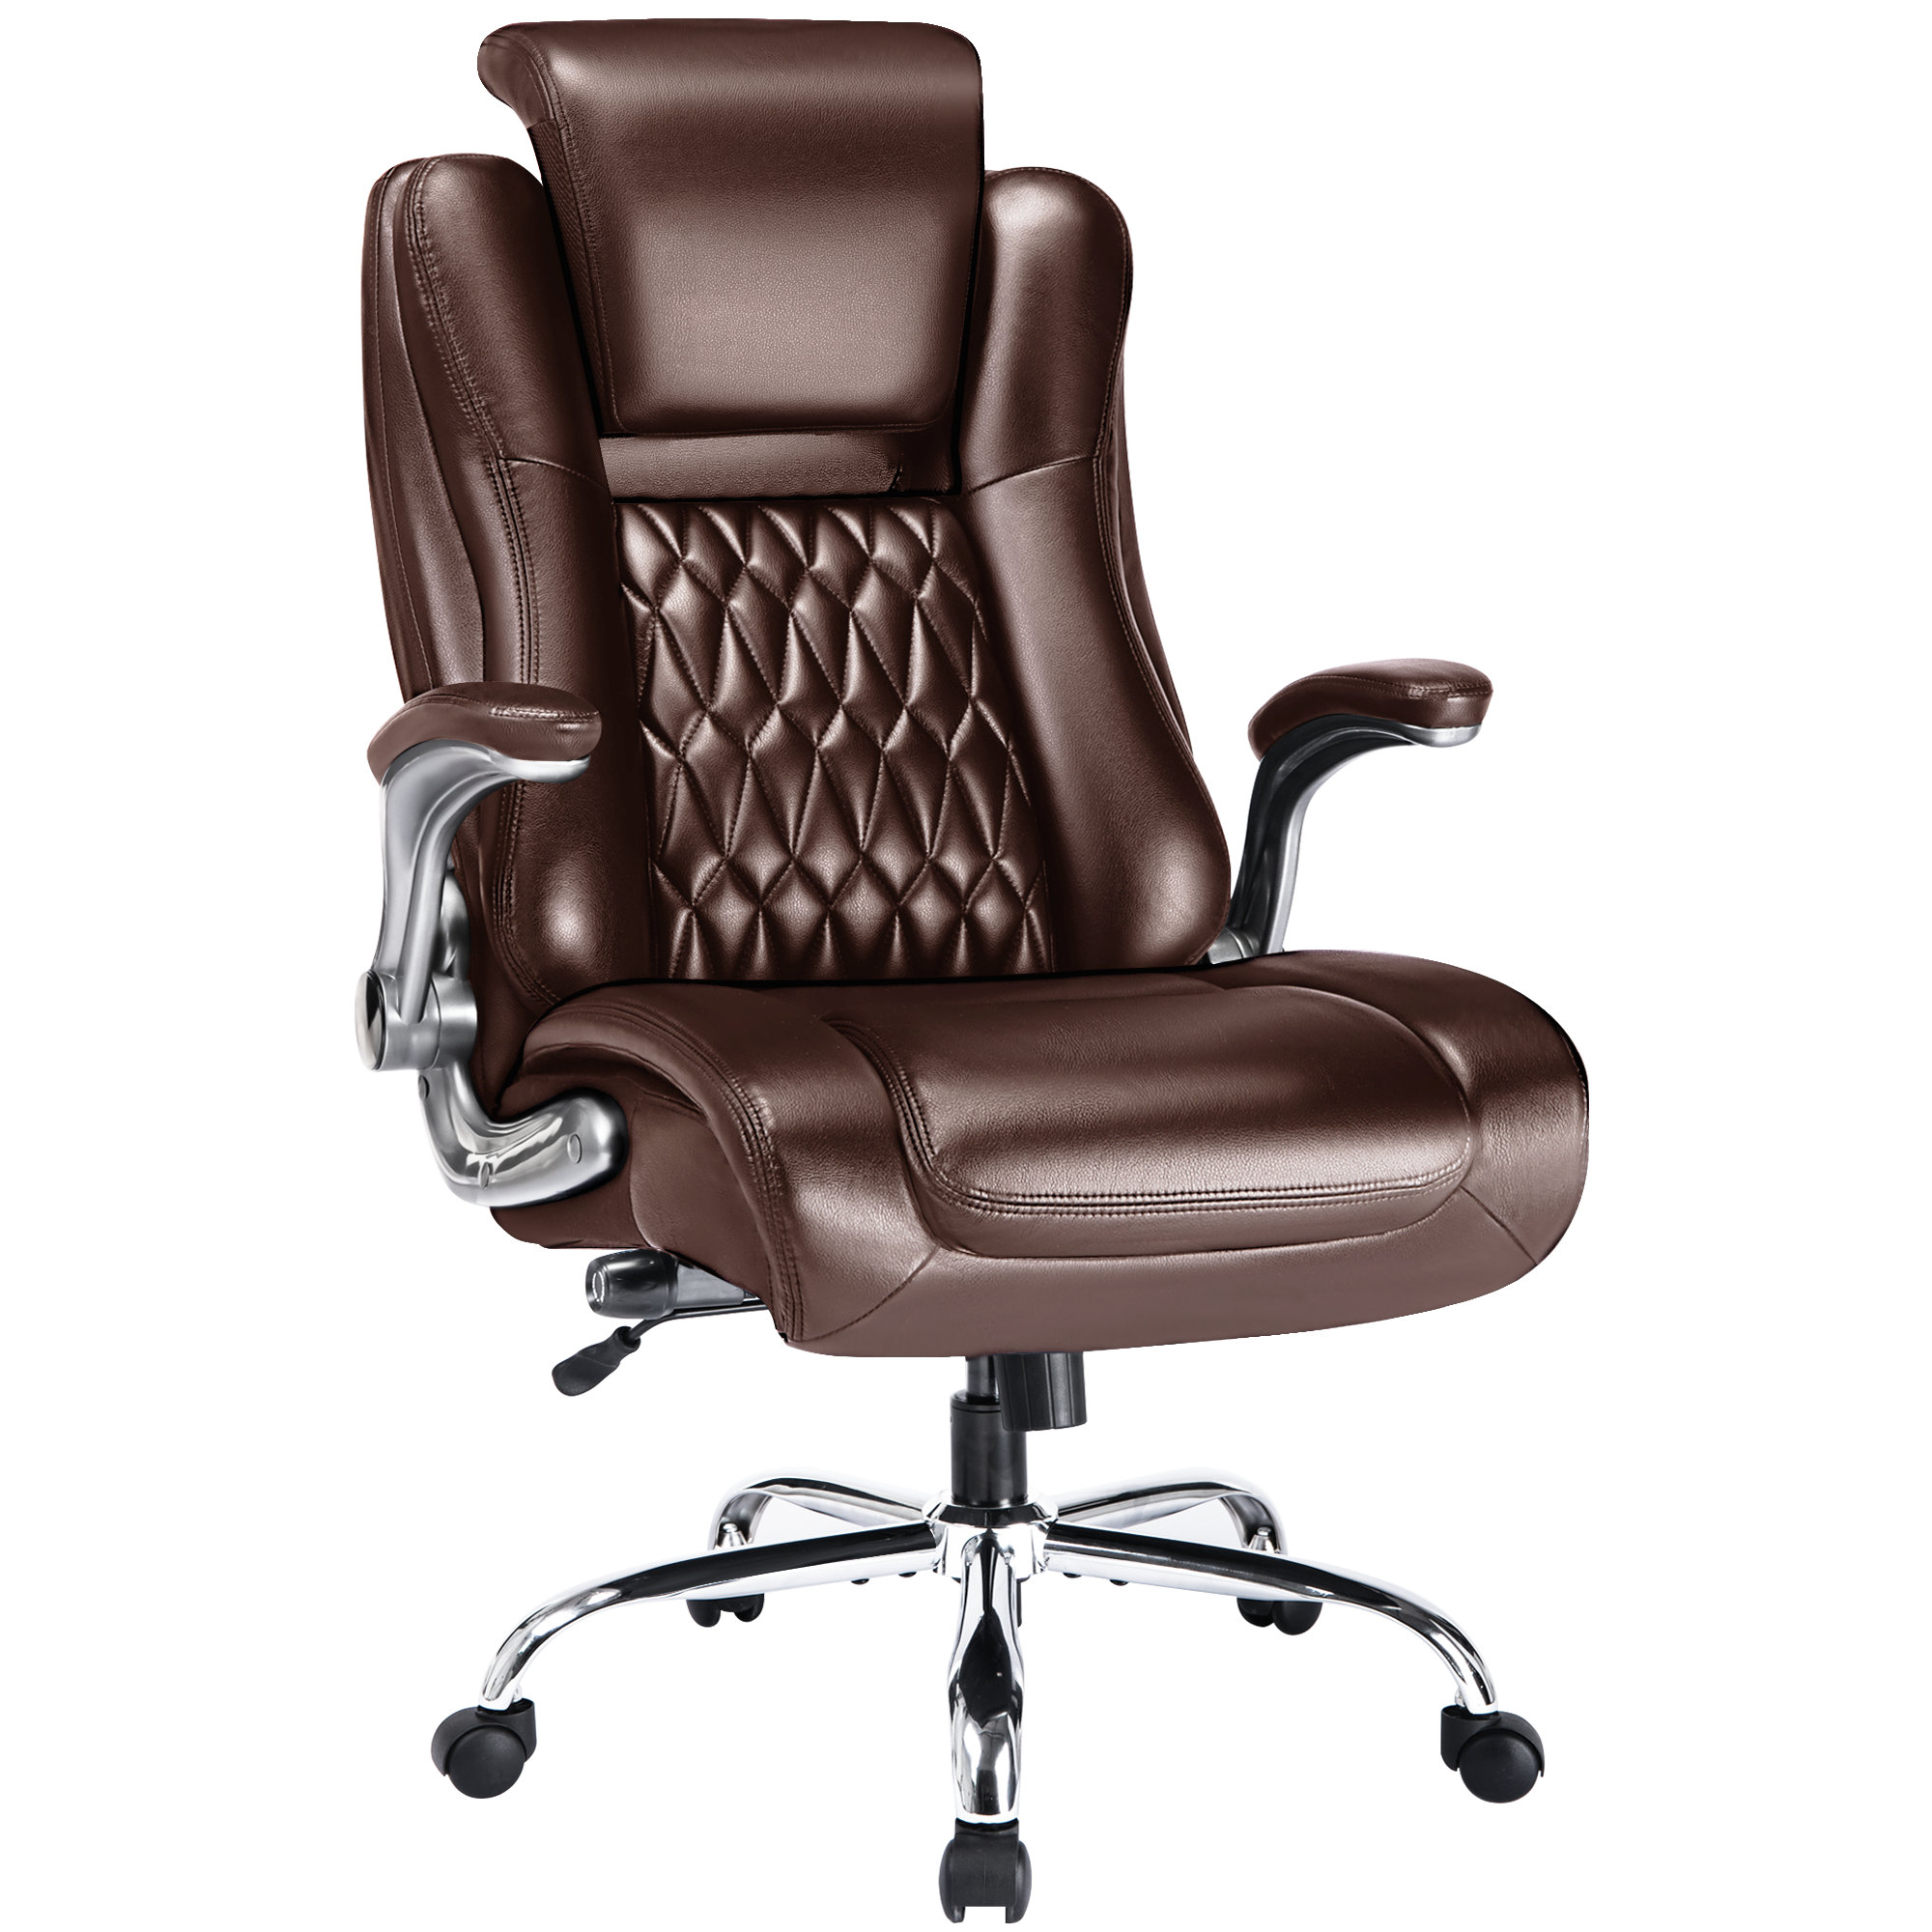 Boss Perfect Posture Deluxe Office Task Chair with Adjustable Arms, Black –  BossChair